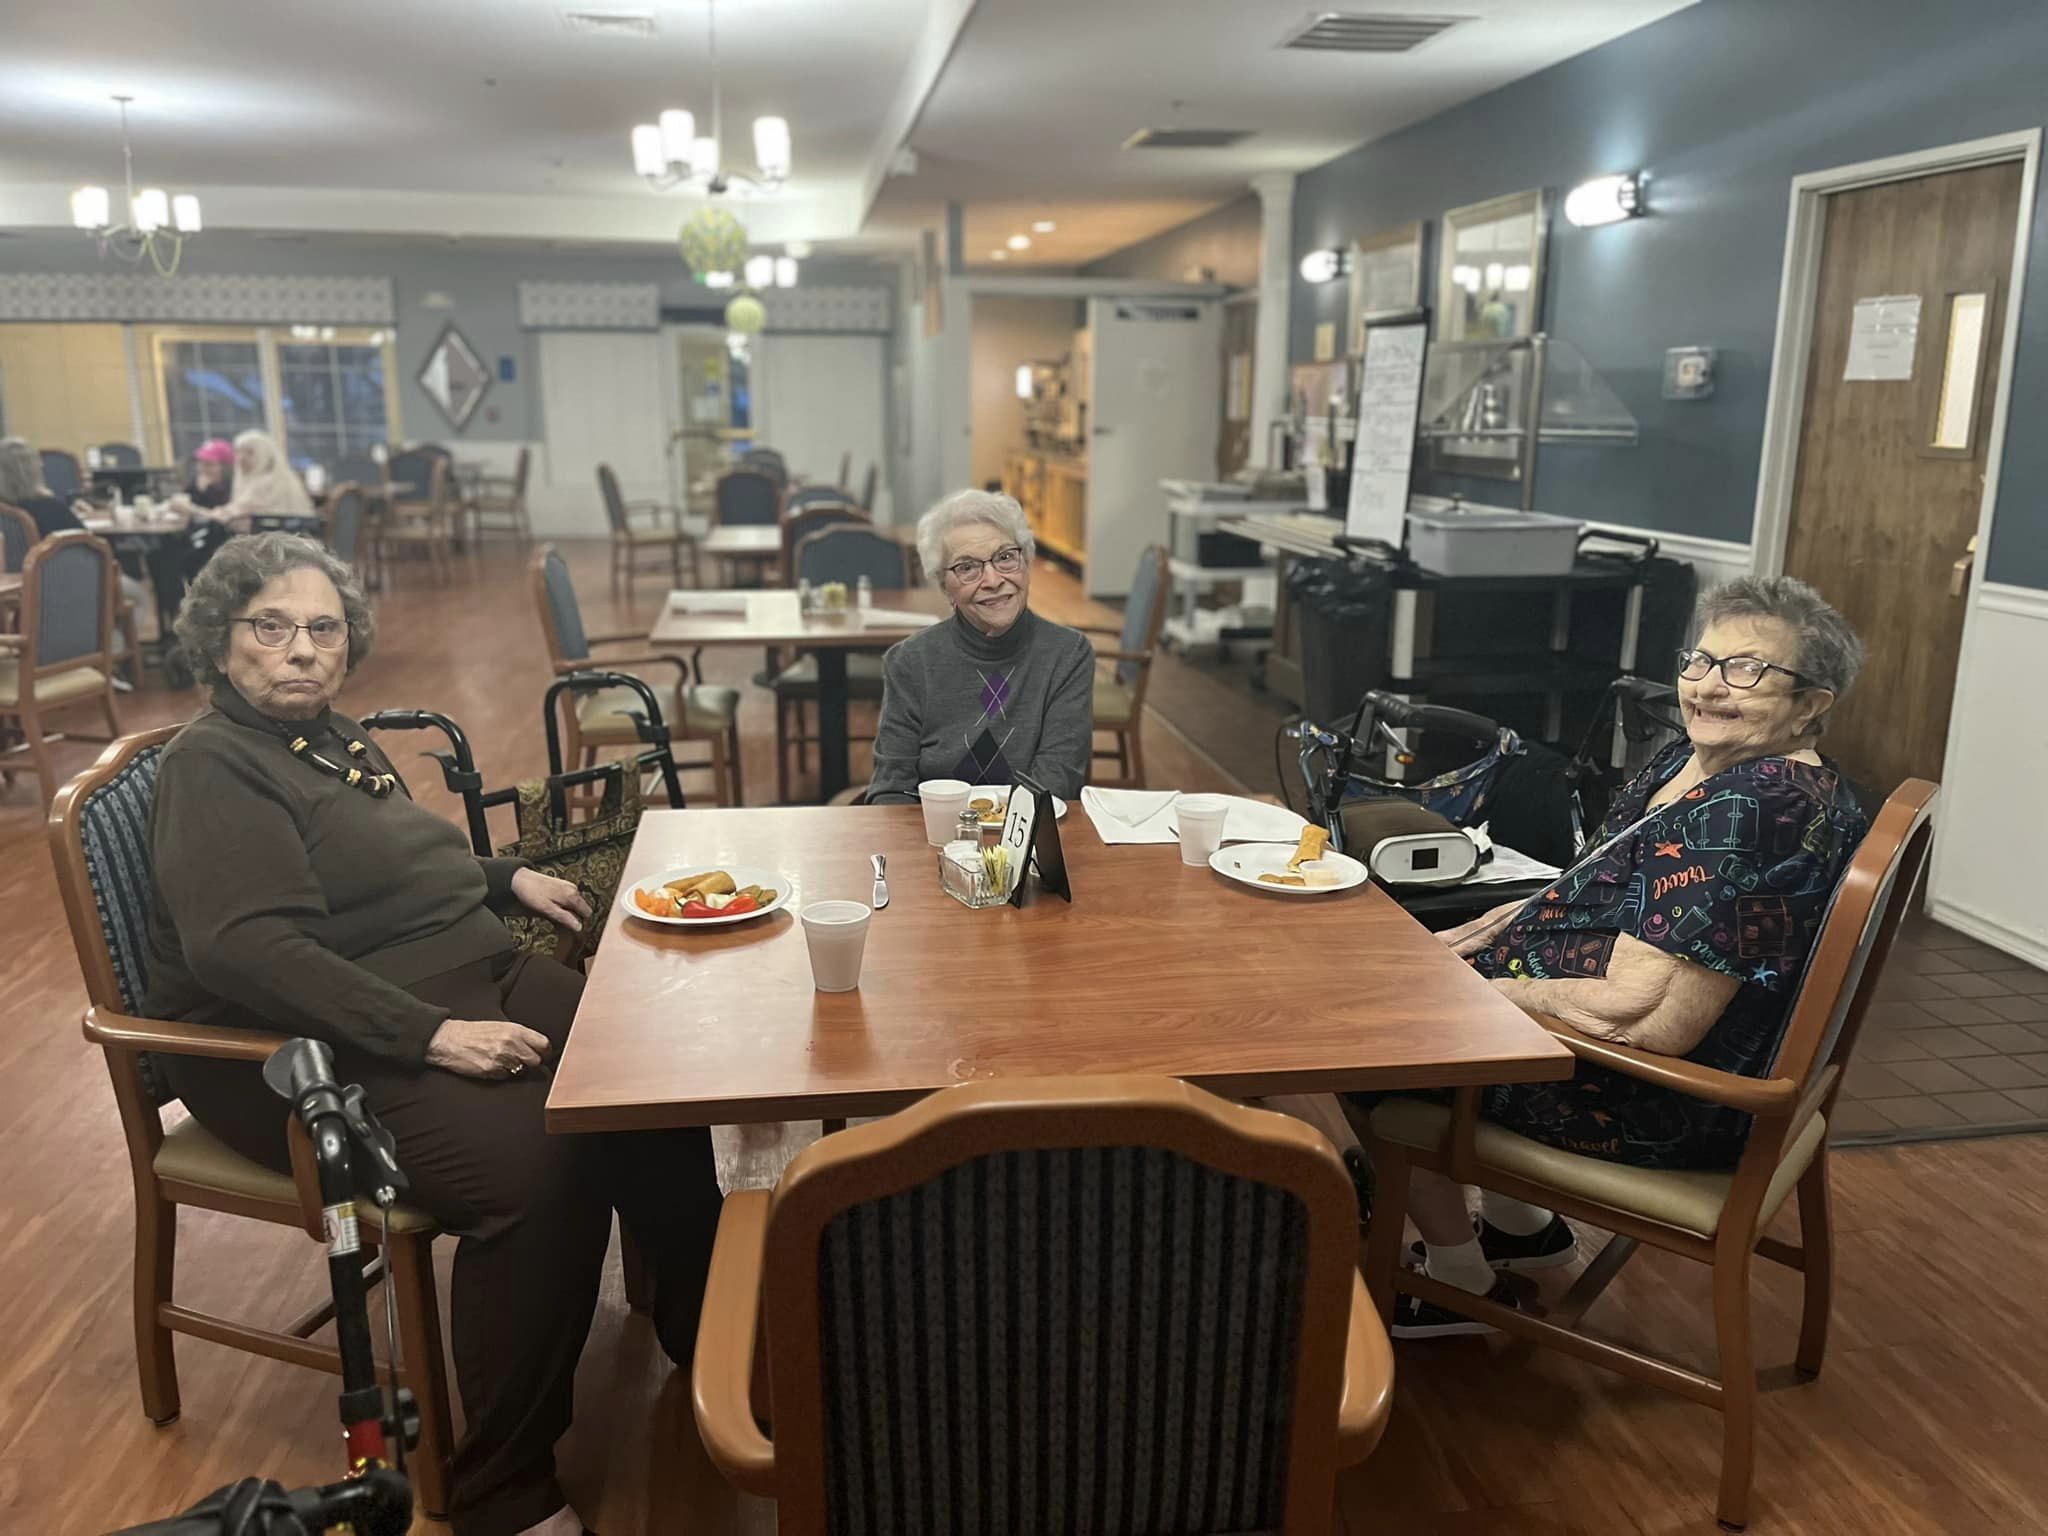 DSV assisted living residents dining